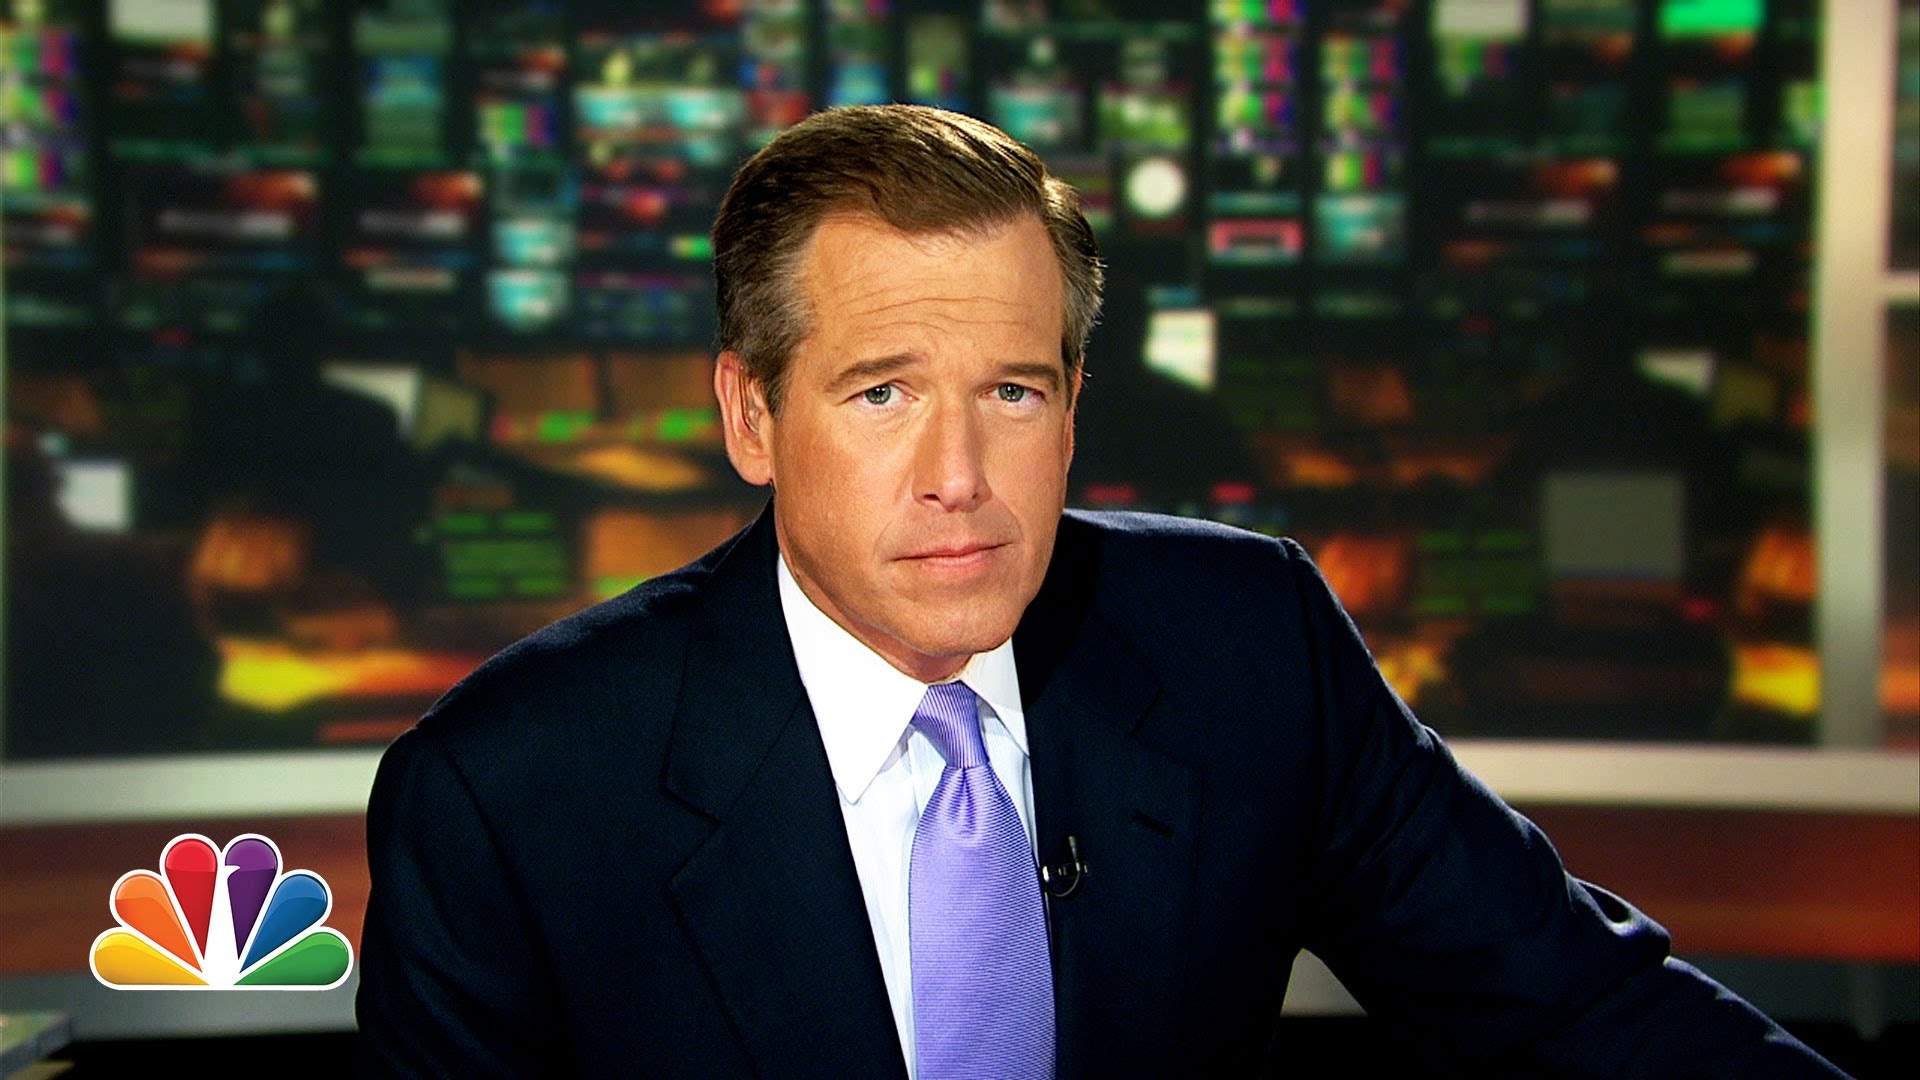 Brian Williams Raps “Gin and Juice”